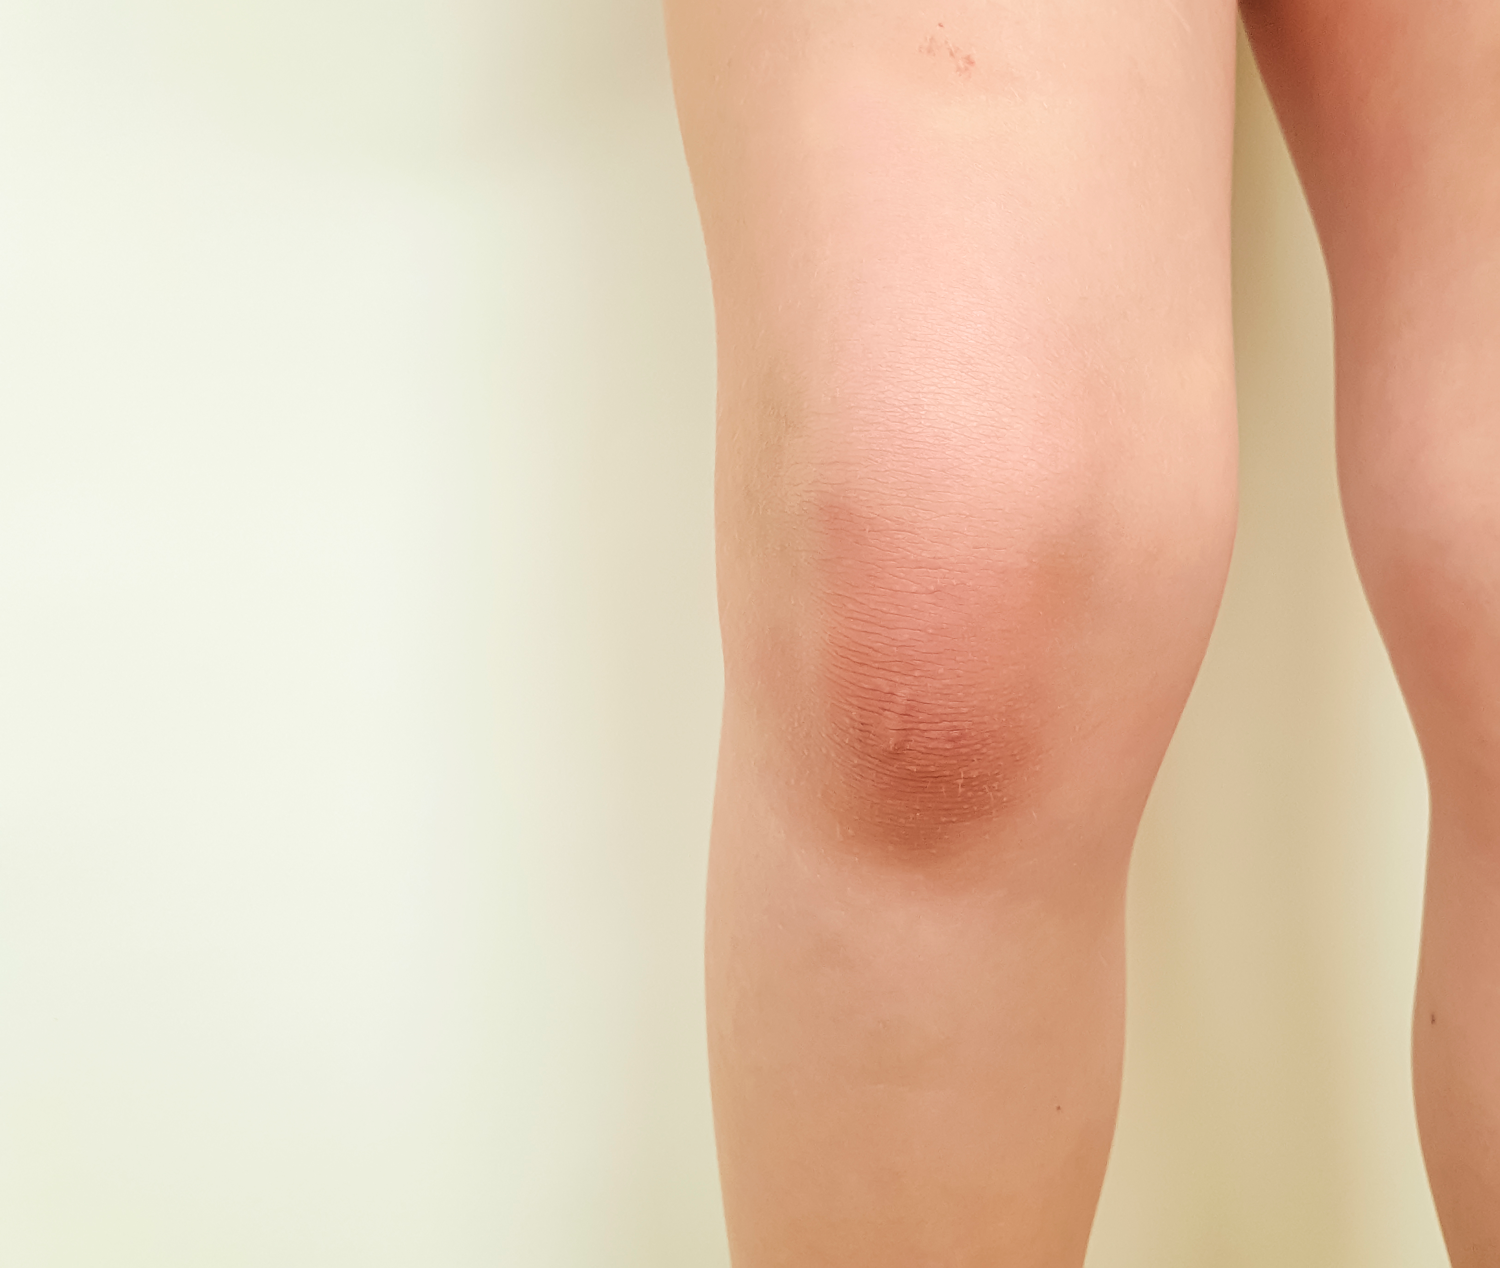 why does my knee hurt on the outside when i get on my knees?